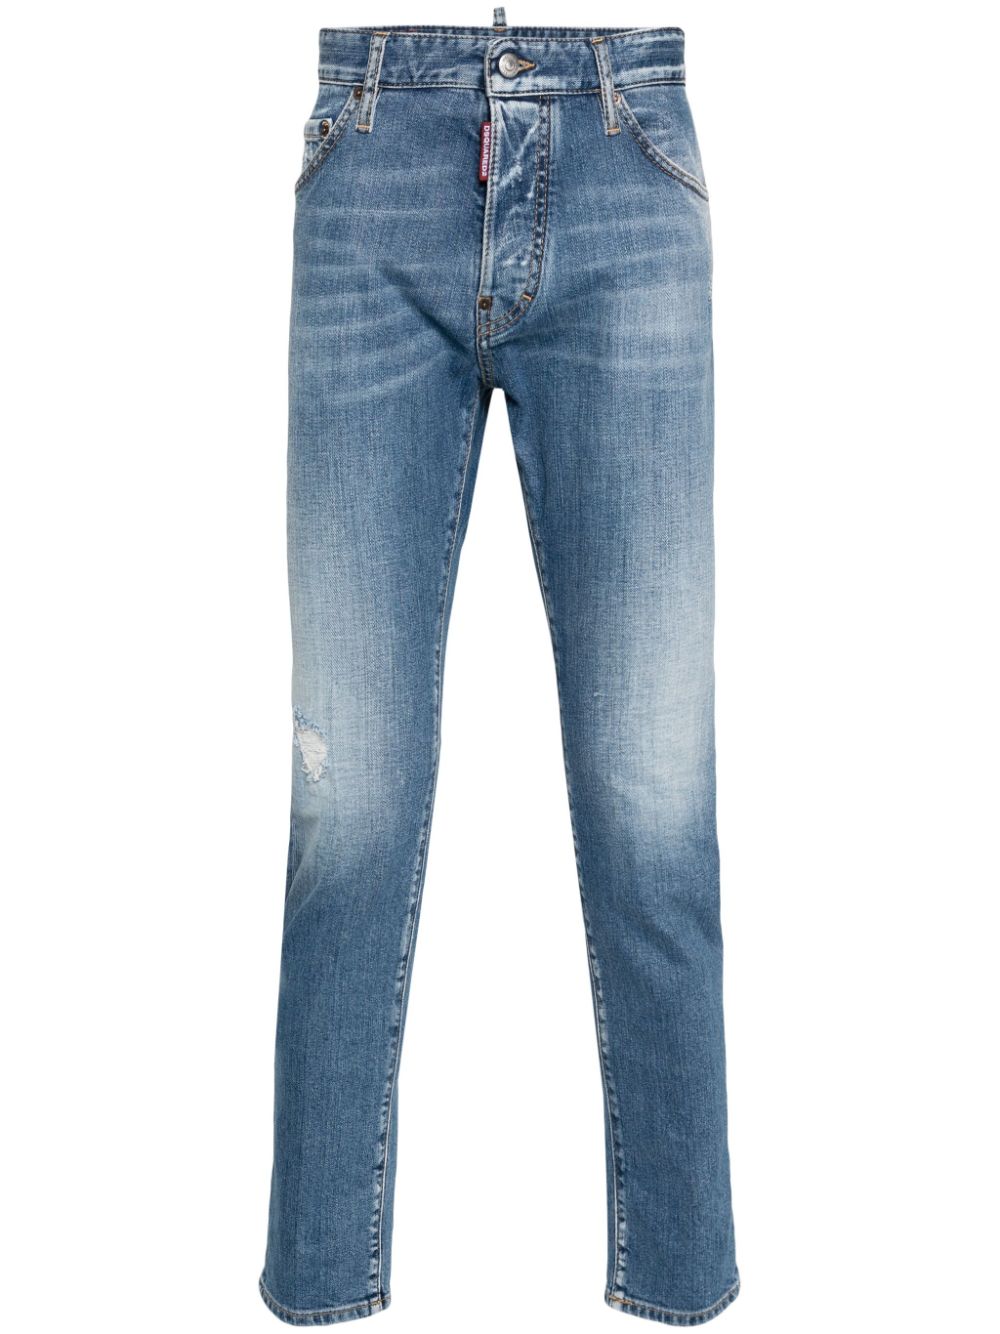 Faded effect jeans